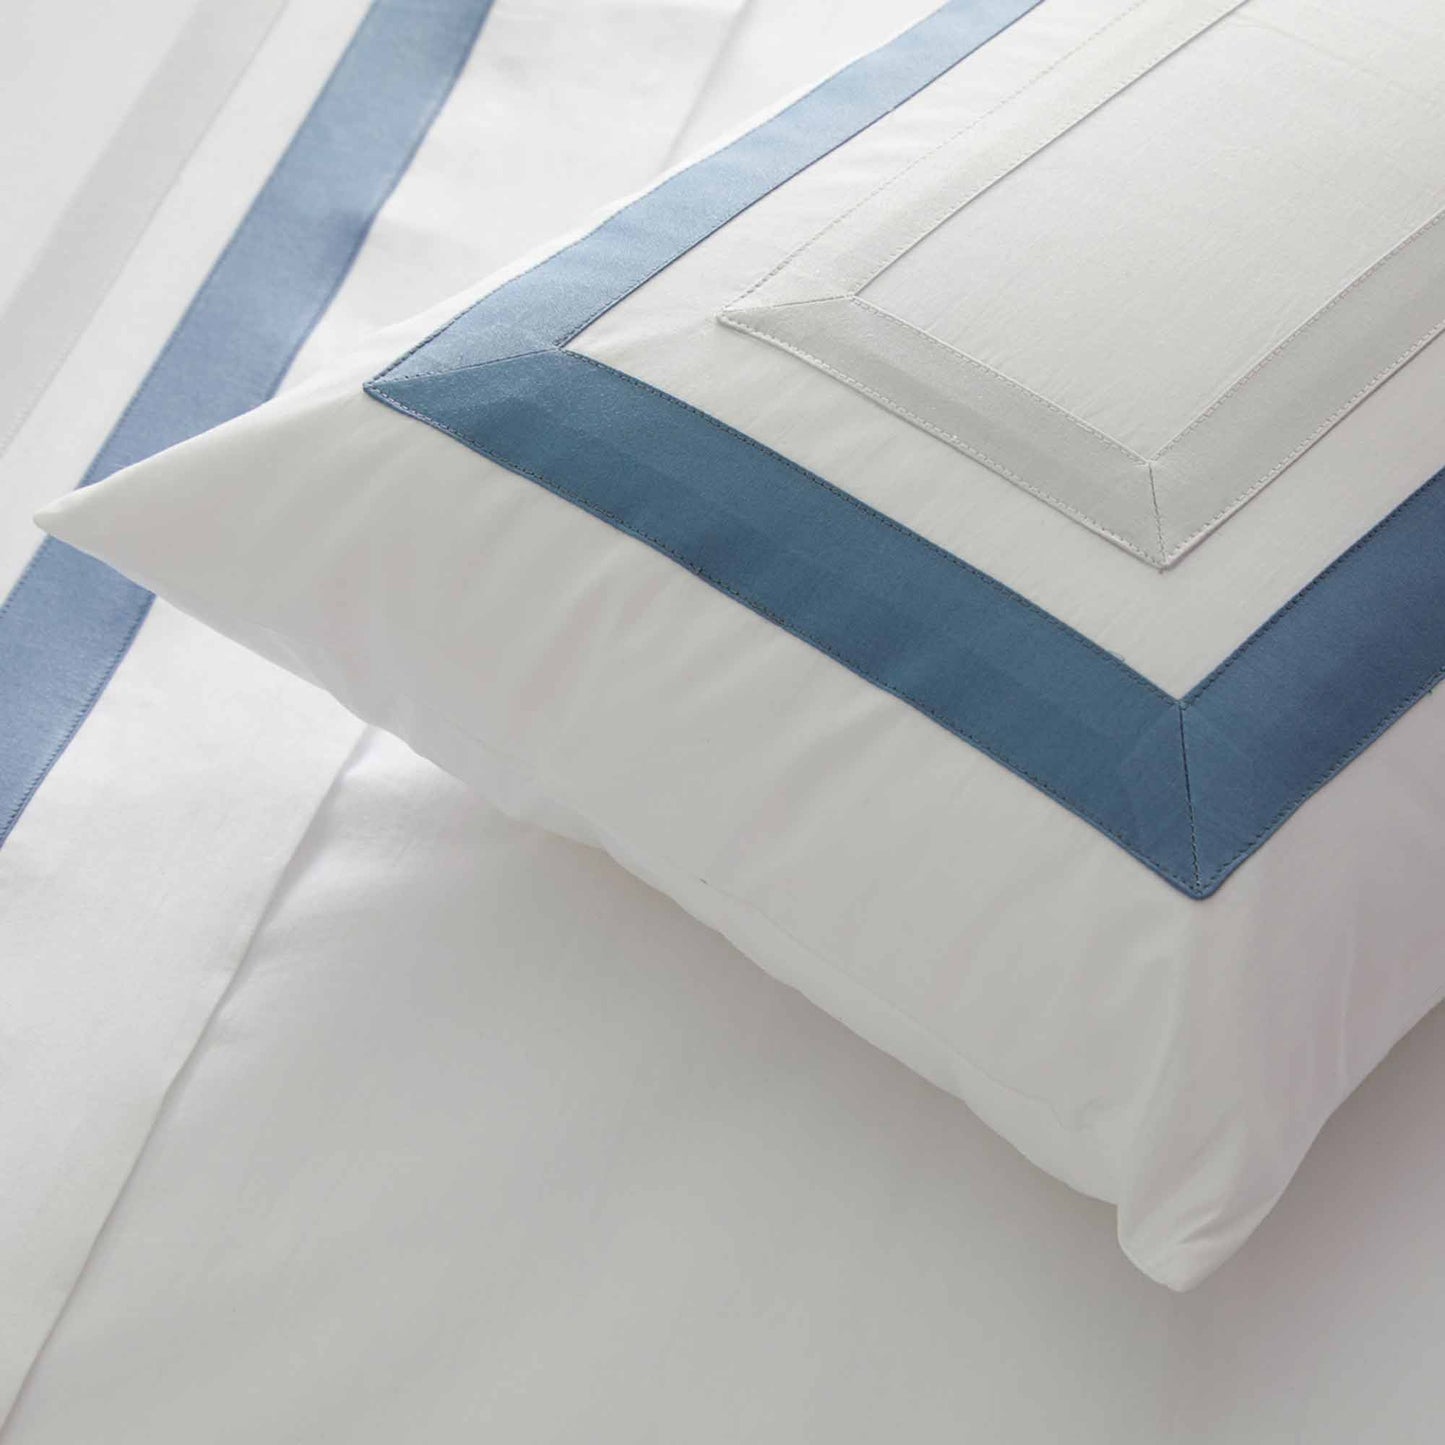 400TC Cotton Percale Sheet Set with Contrasting Satin Applications - Pure